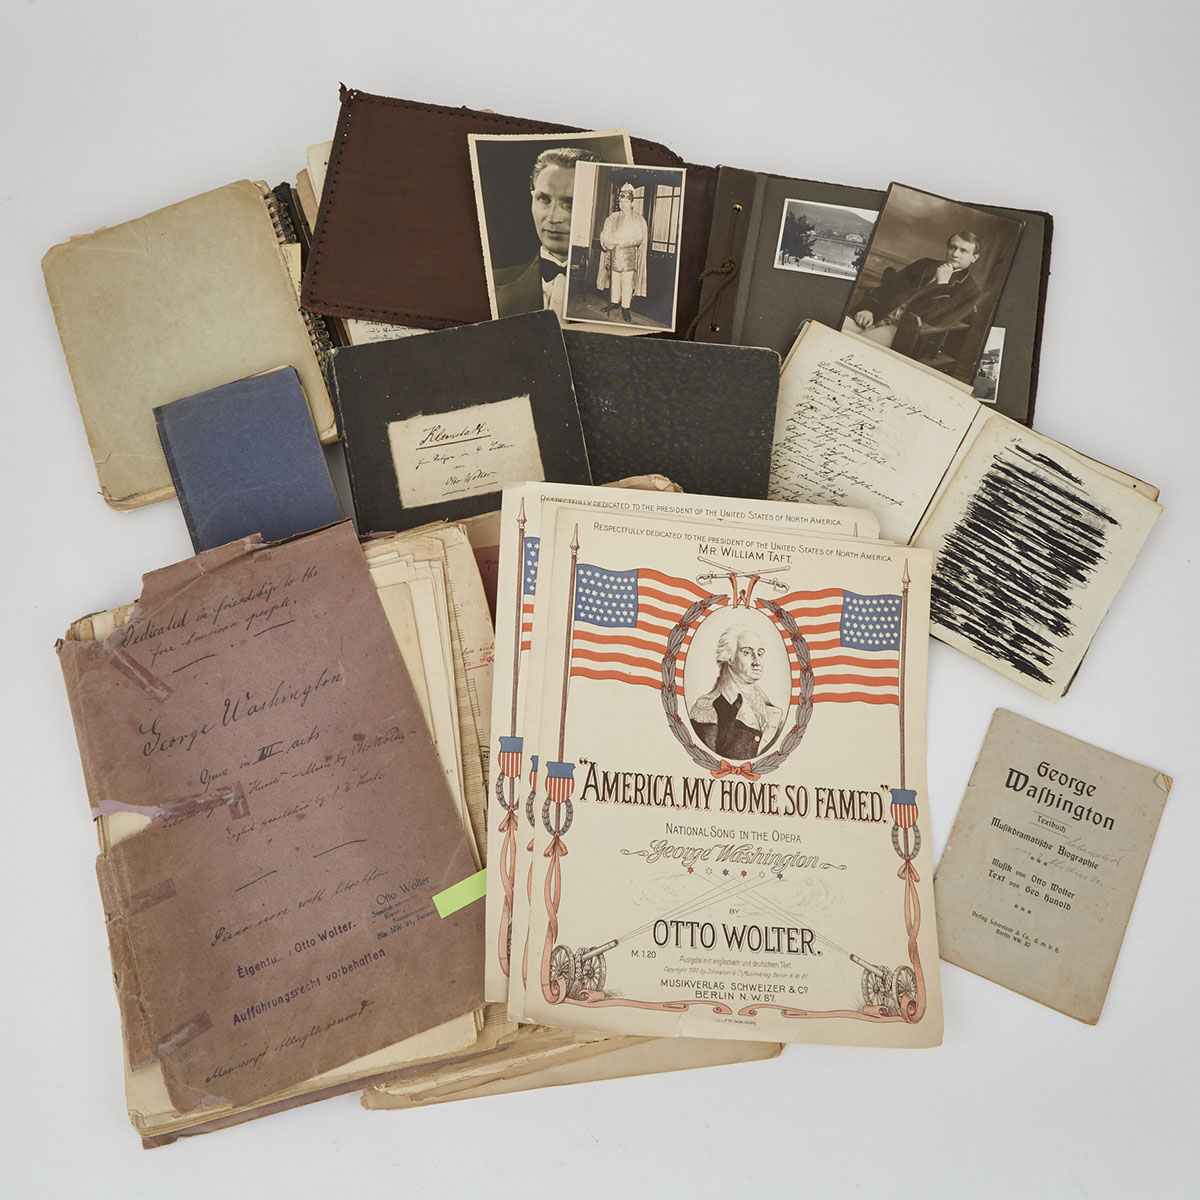 Archive Relating To German Composer Otto Wolter, Including Original Score for Opera ‘George Washington, early 19th century